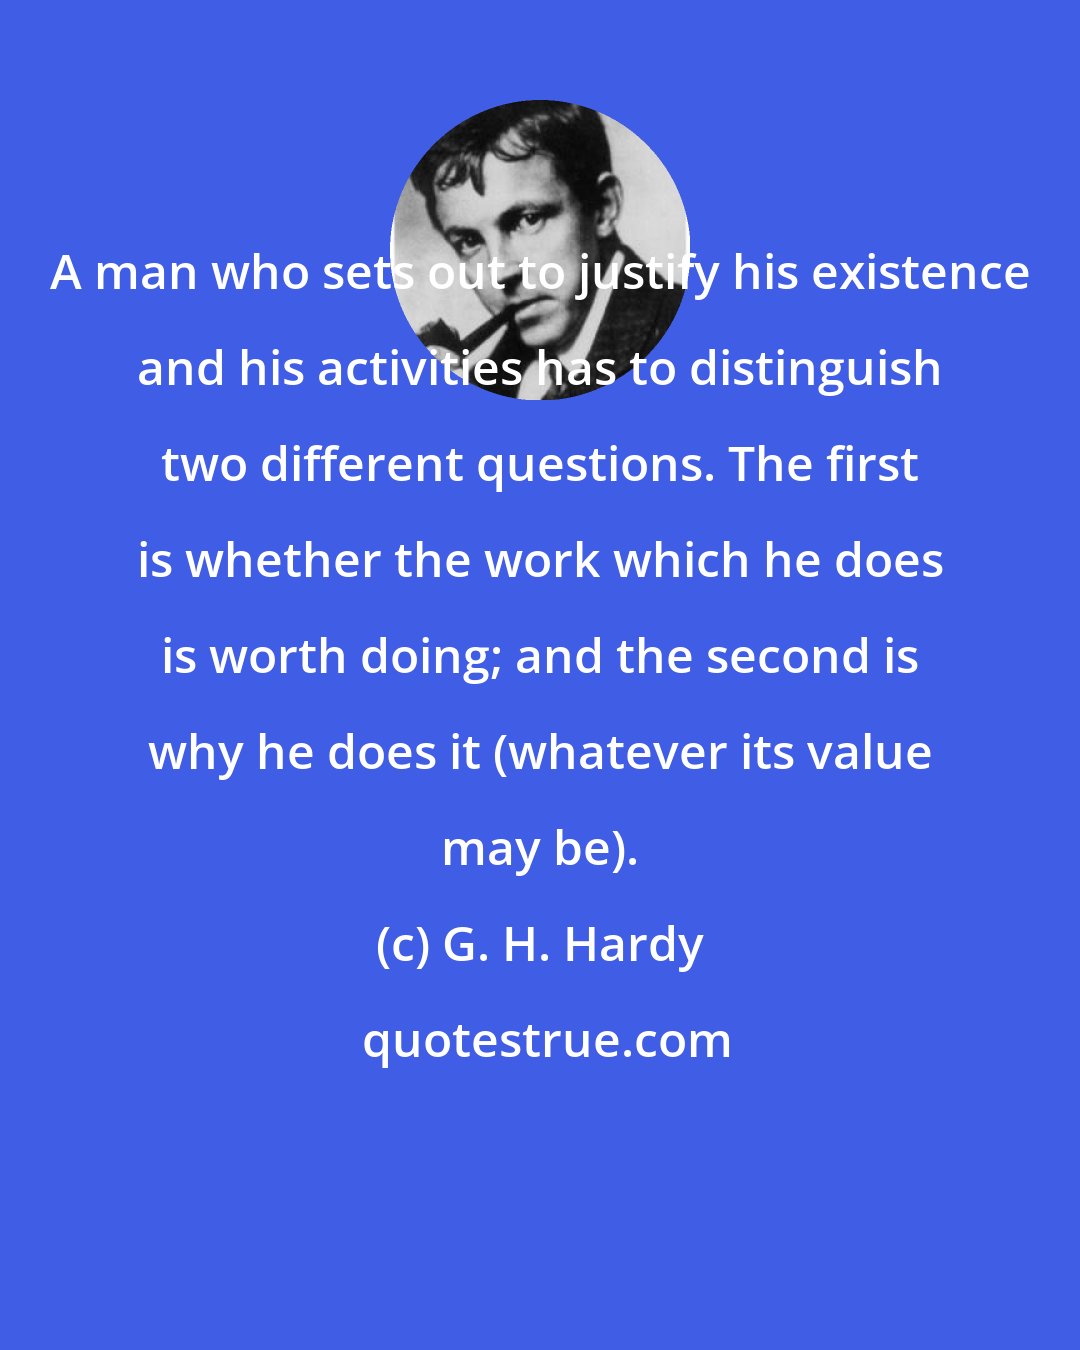 G. H. Hardy: A man who sets out to justify his existence and his activities has to distinguish two different questions. The first is whether the work which he does is worth doing; and the second is why he does it (whatever its value may be).